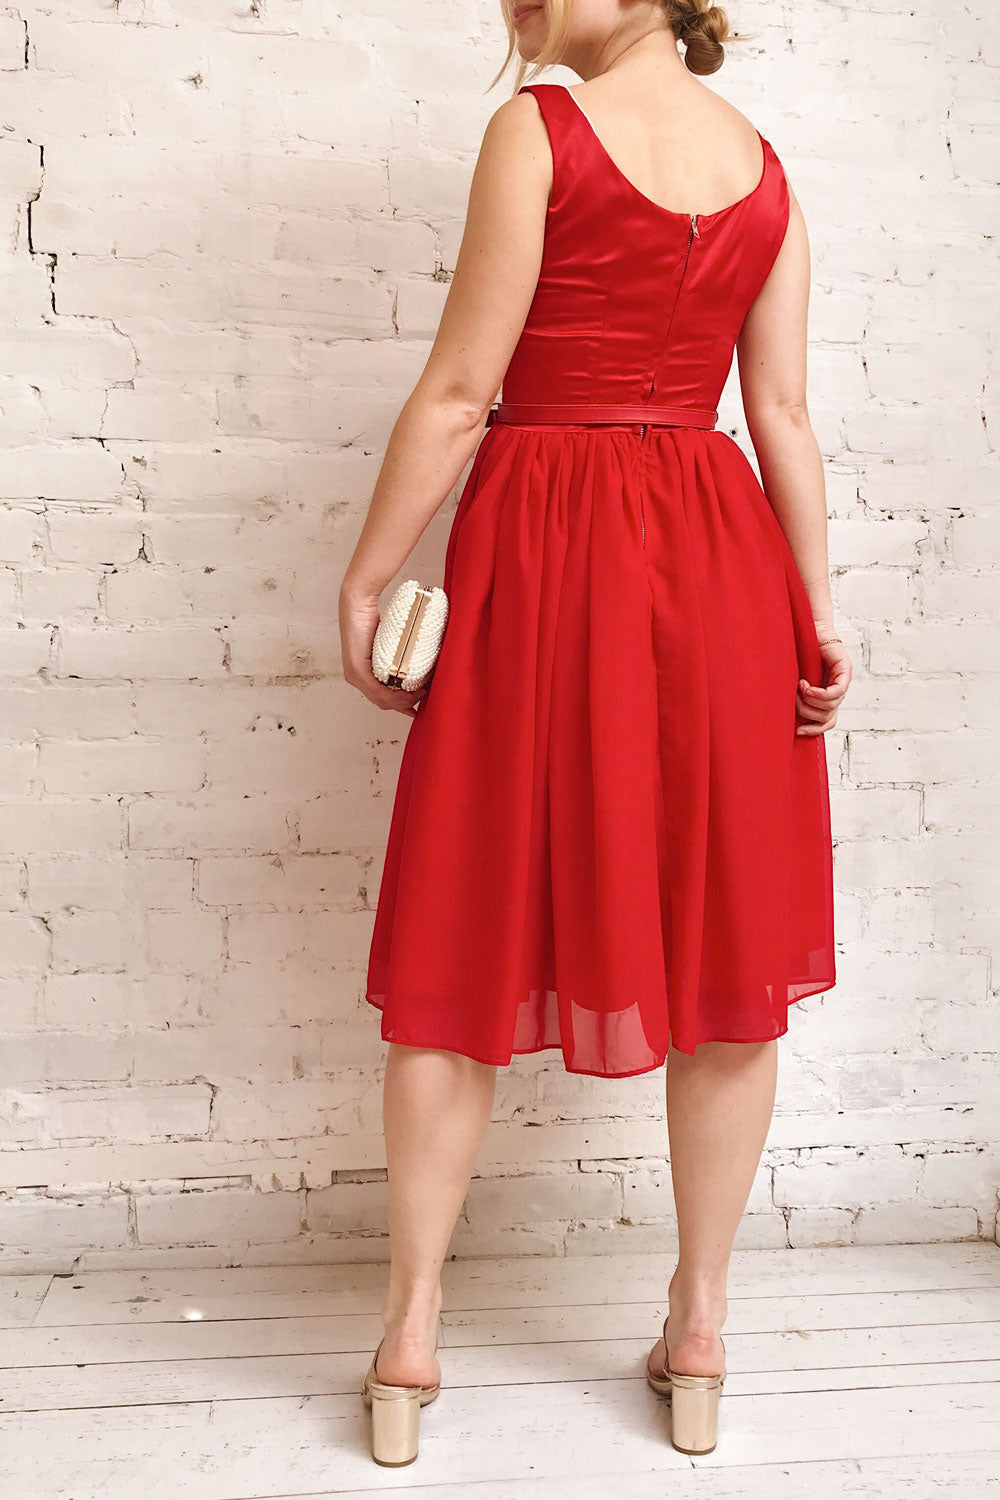 Maruela Rouge Red A-Line Flared Midi Dress | Boutique 1861 model back